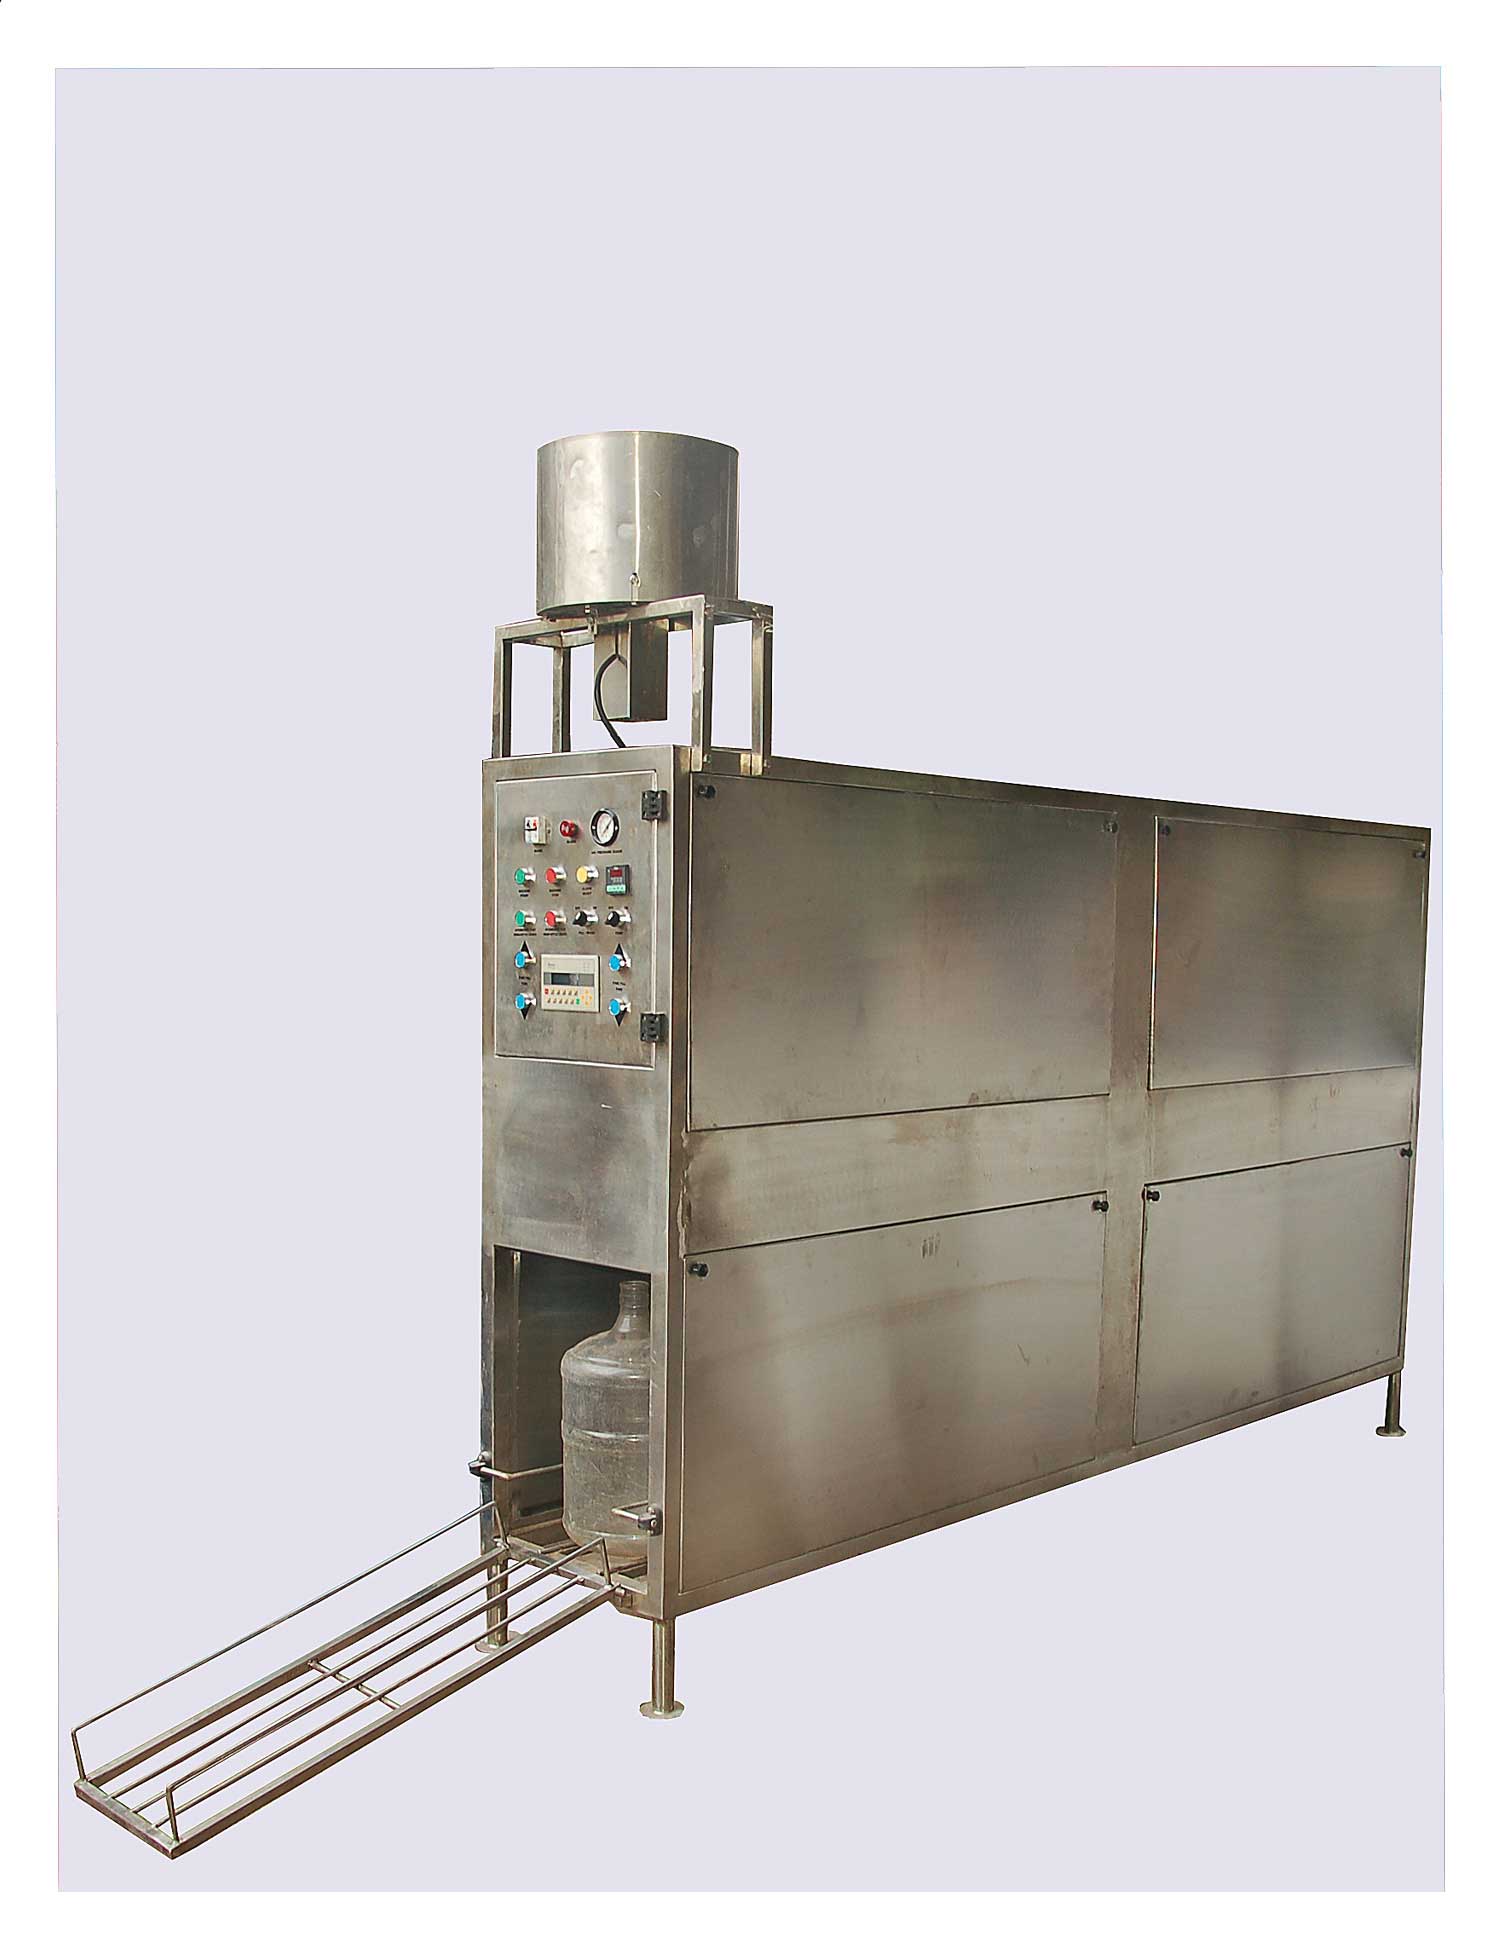  Automatic 20 Liter Jar’s Rinsing, Filling And Capping Machine 100-120 JH Manufacturers & Exporters from India